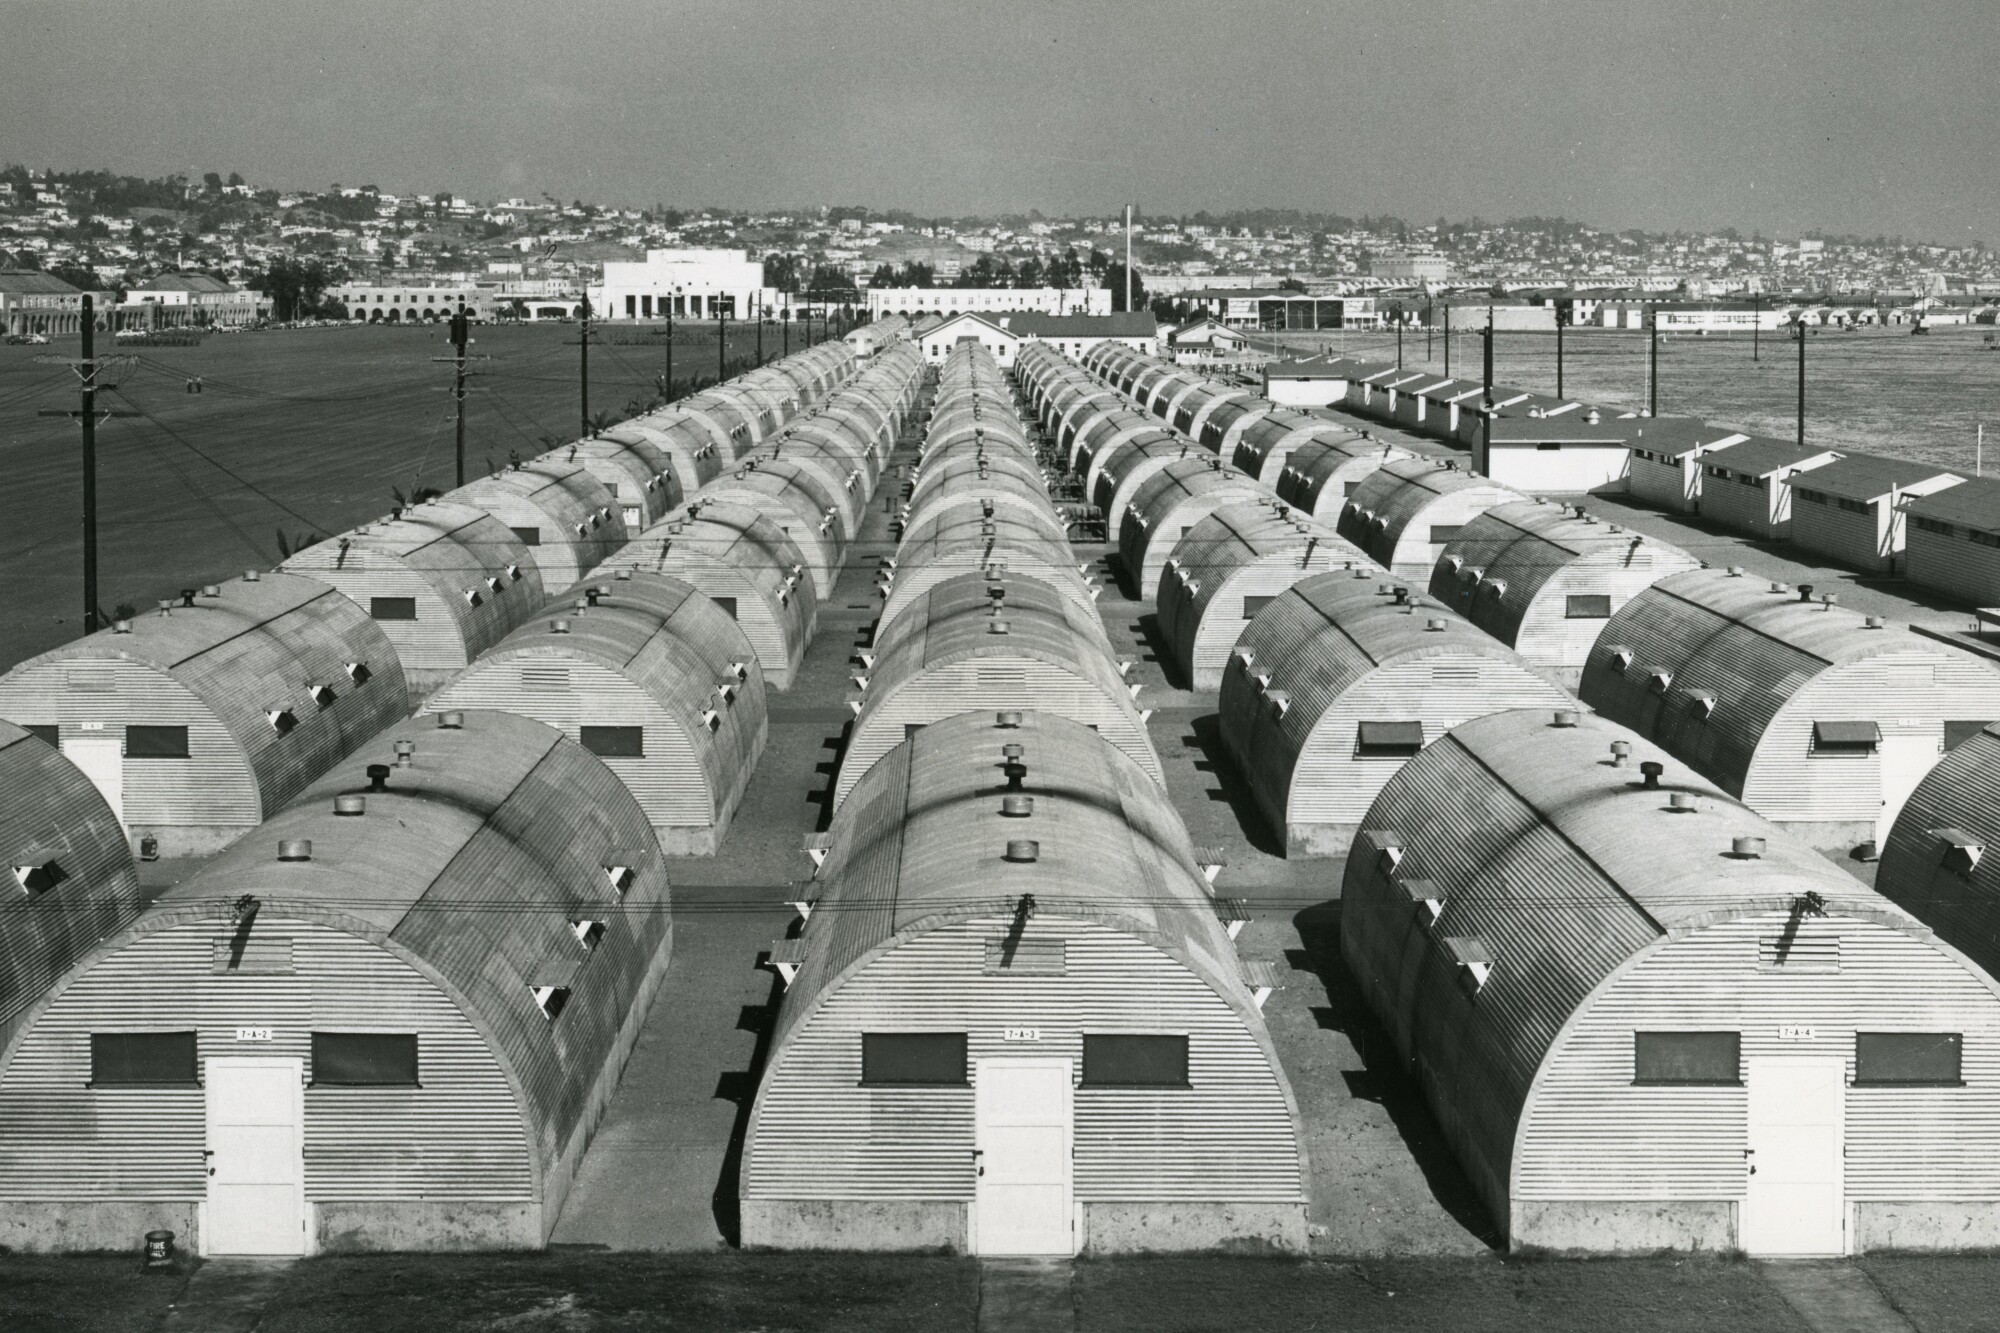 Hundreds of Quonset huts were erected at the Marine Corps Recruit Depot in San Diego